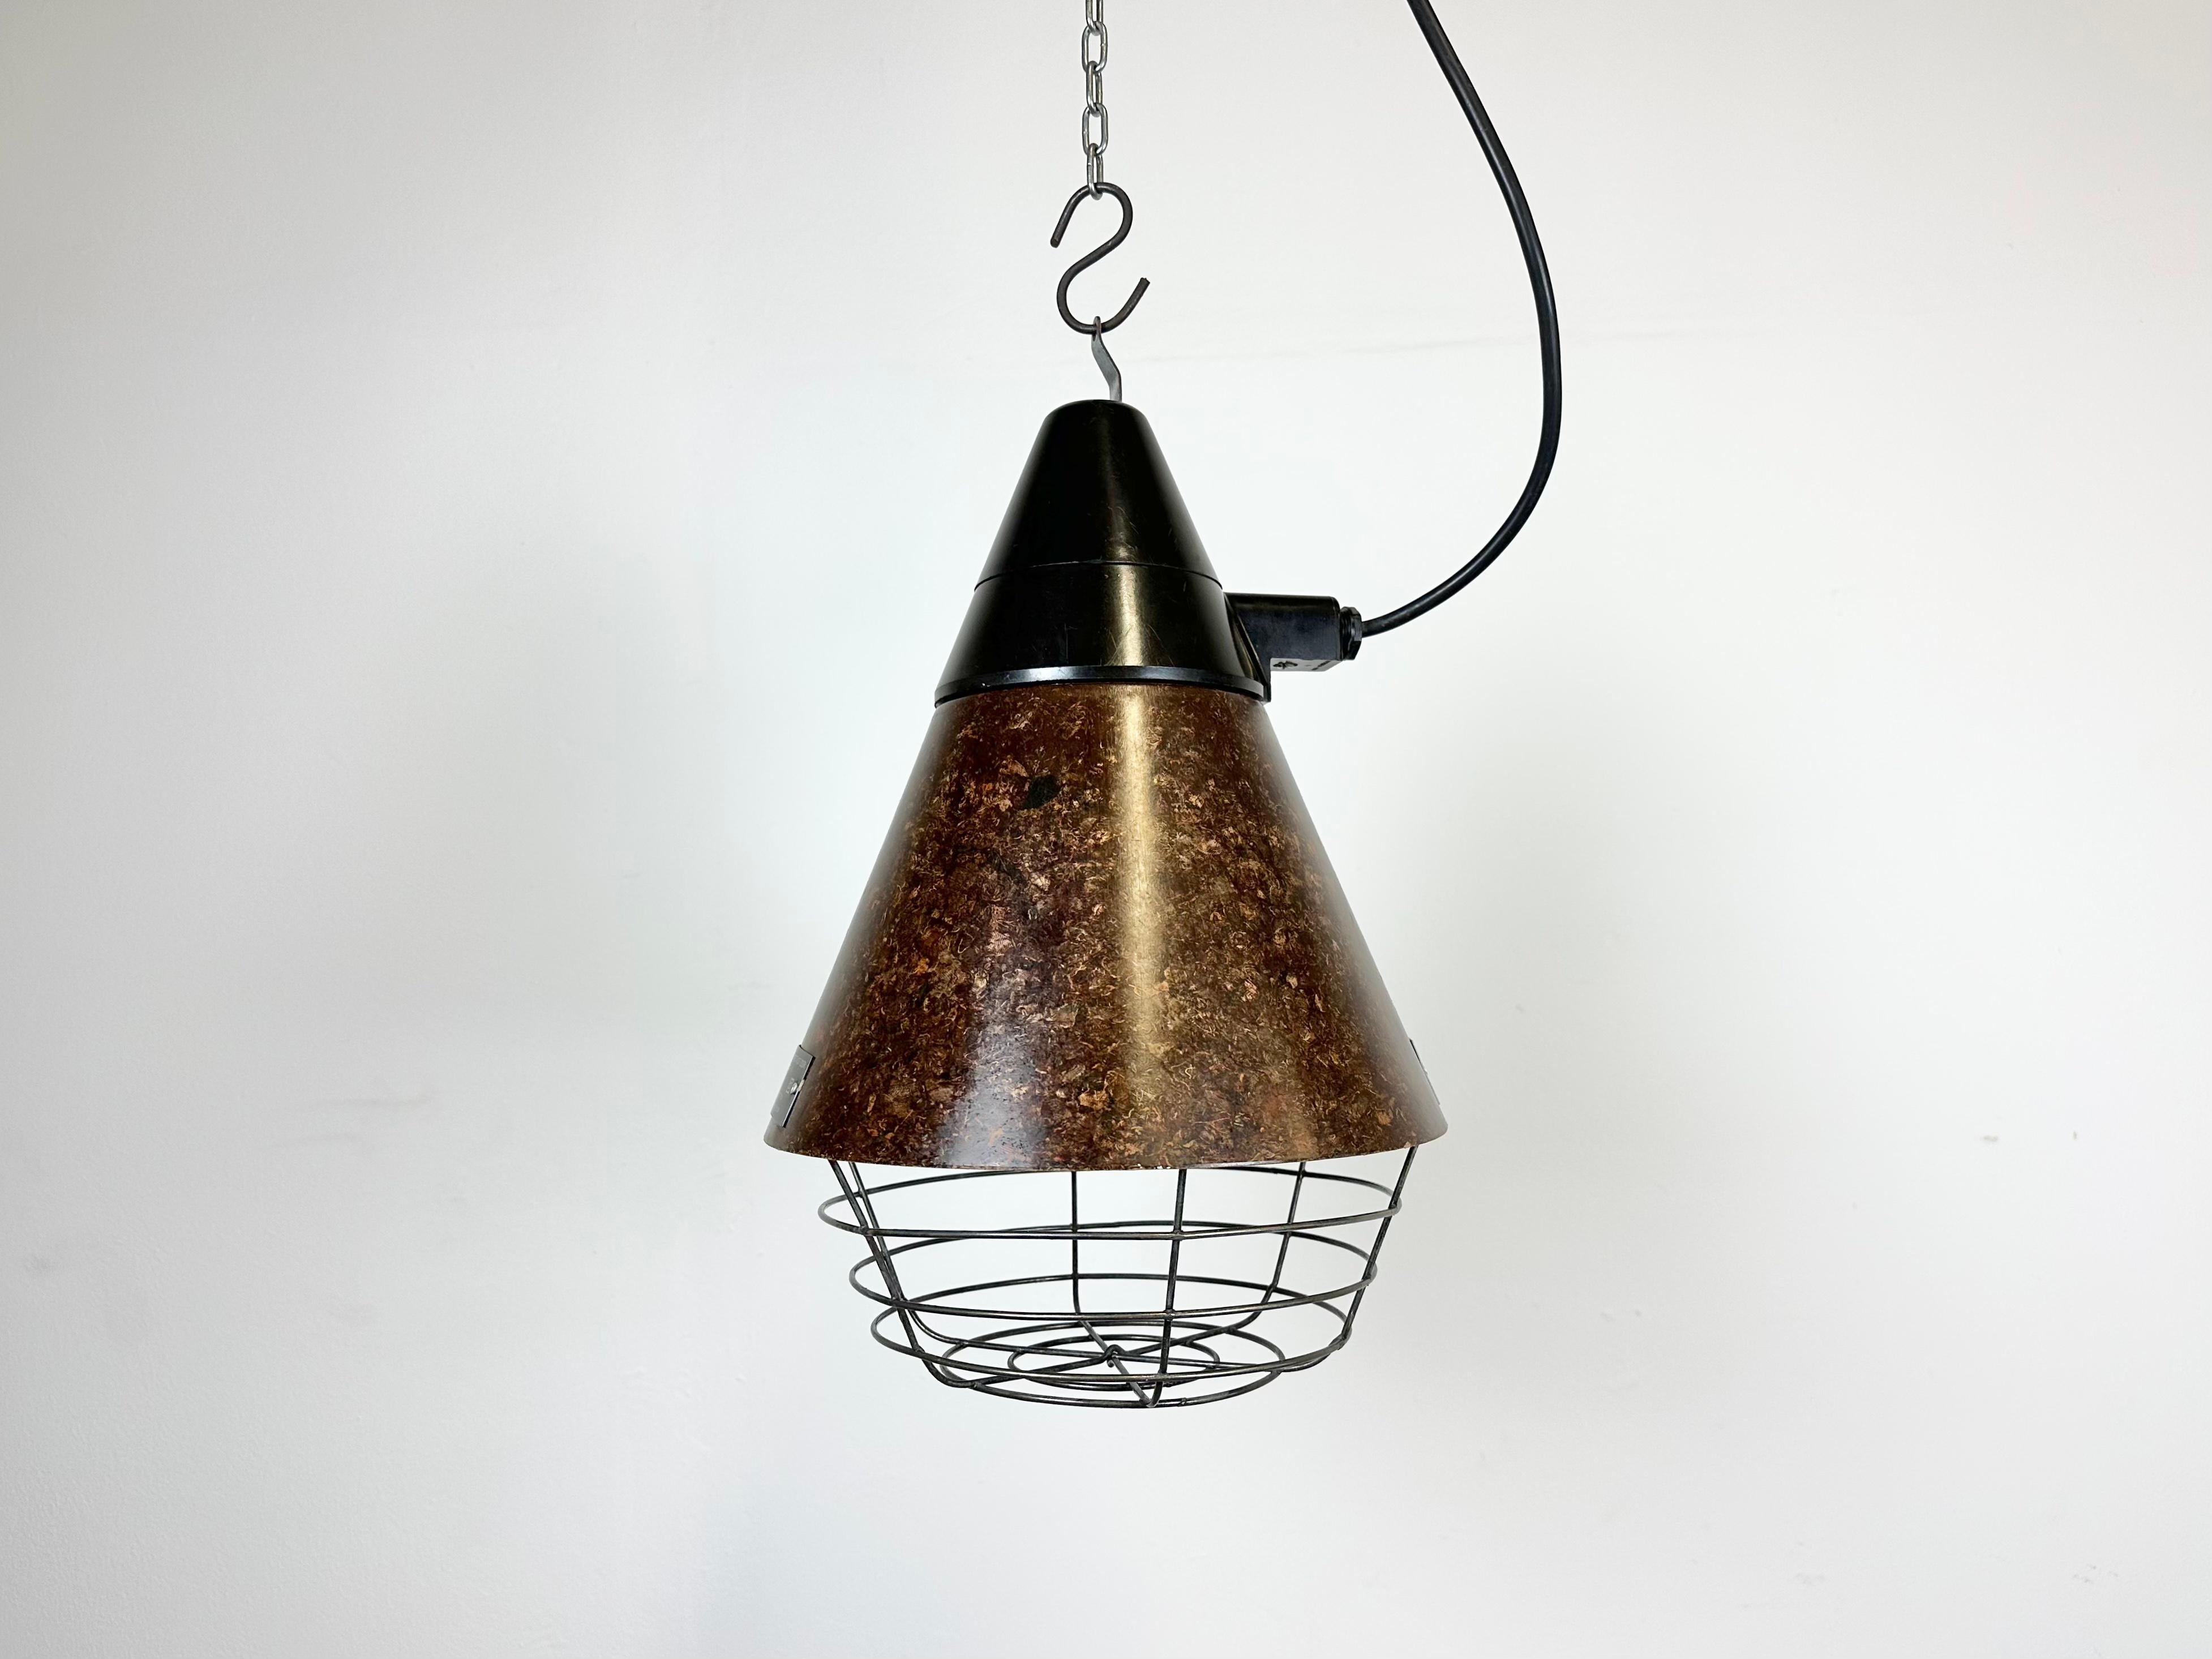 Former barn light was used as a infra-red light to keep the animals warm. Made by VEB NARVA ARTAS ARNSTADT DDR in East Germany during the 1960s. It features a brown bakelite conic lampshade and iron grid. The original socket requirers E 27/ E 26